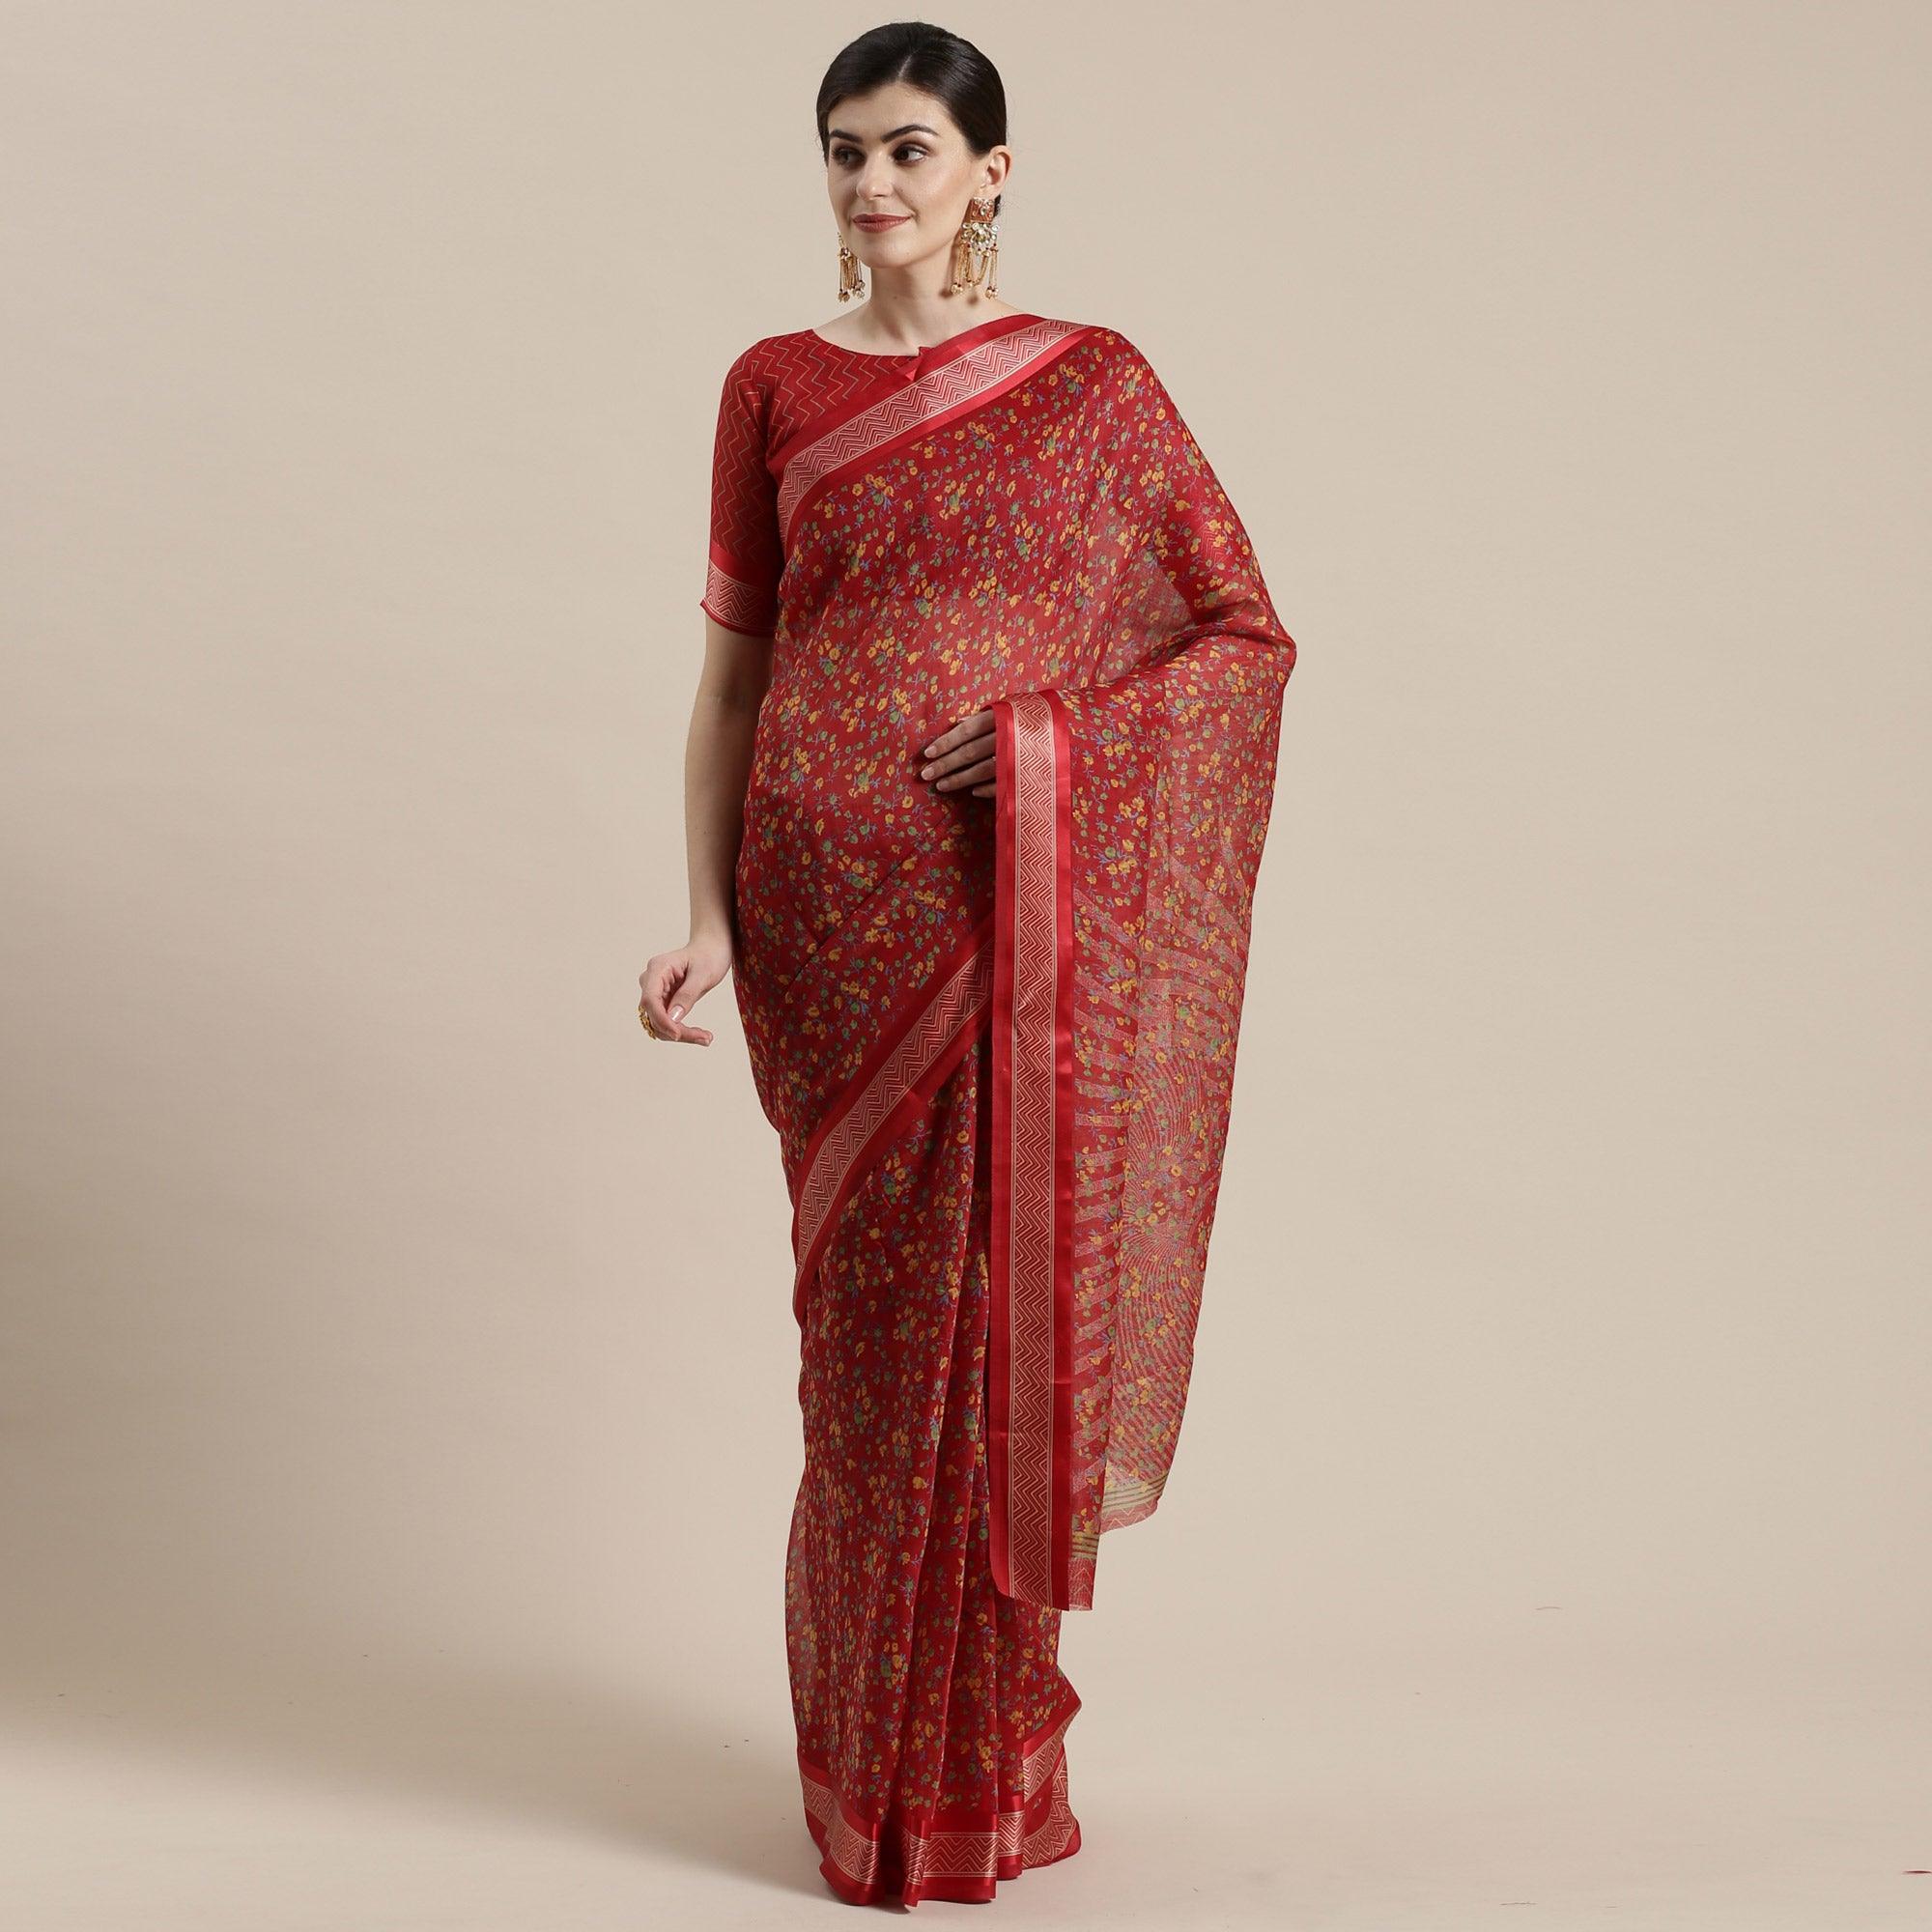 Lovely Maroon Colored Casual Wear Floral Printed Cotton Silk Saree - Peachmode